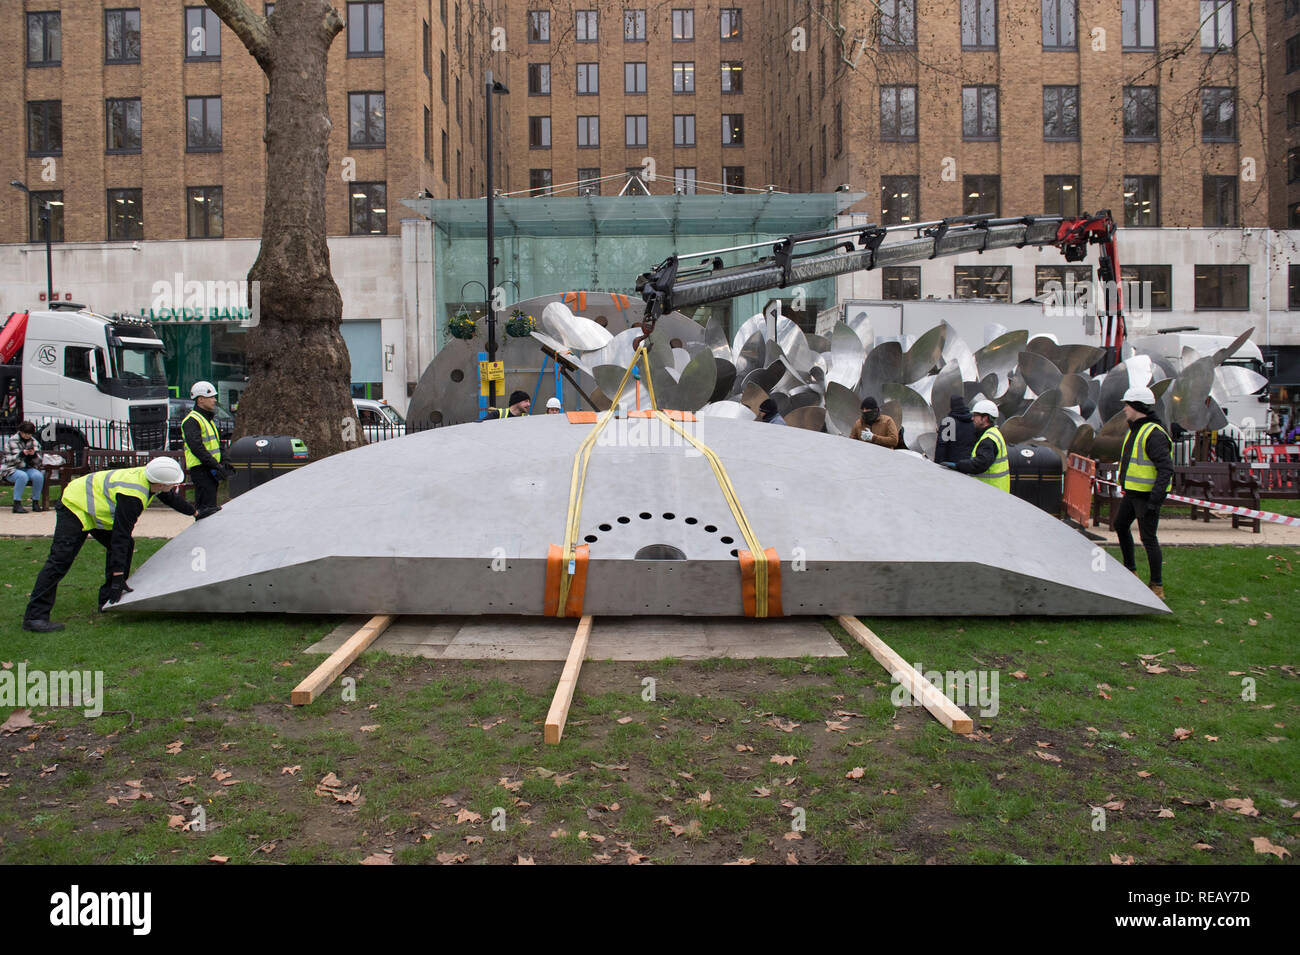 Berkeley Square, London, UK. 21 January, 2019. Opera Gallery launch a large sculpture made by Spanish artist Manolo Valdes, part of City of London’s Sculpture in the City initiative that uses urban realm as a rotating gallery space and it will be in the square for 6 months. Image: installation of component parts of the large work takes place opposite the entrance to Berkeley Square House. Credit: Malcolm Park/Alamy Live News. Stock Photo